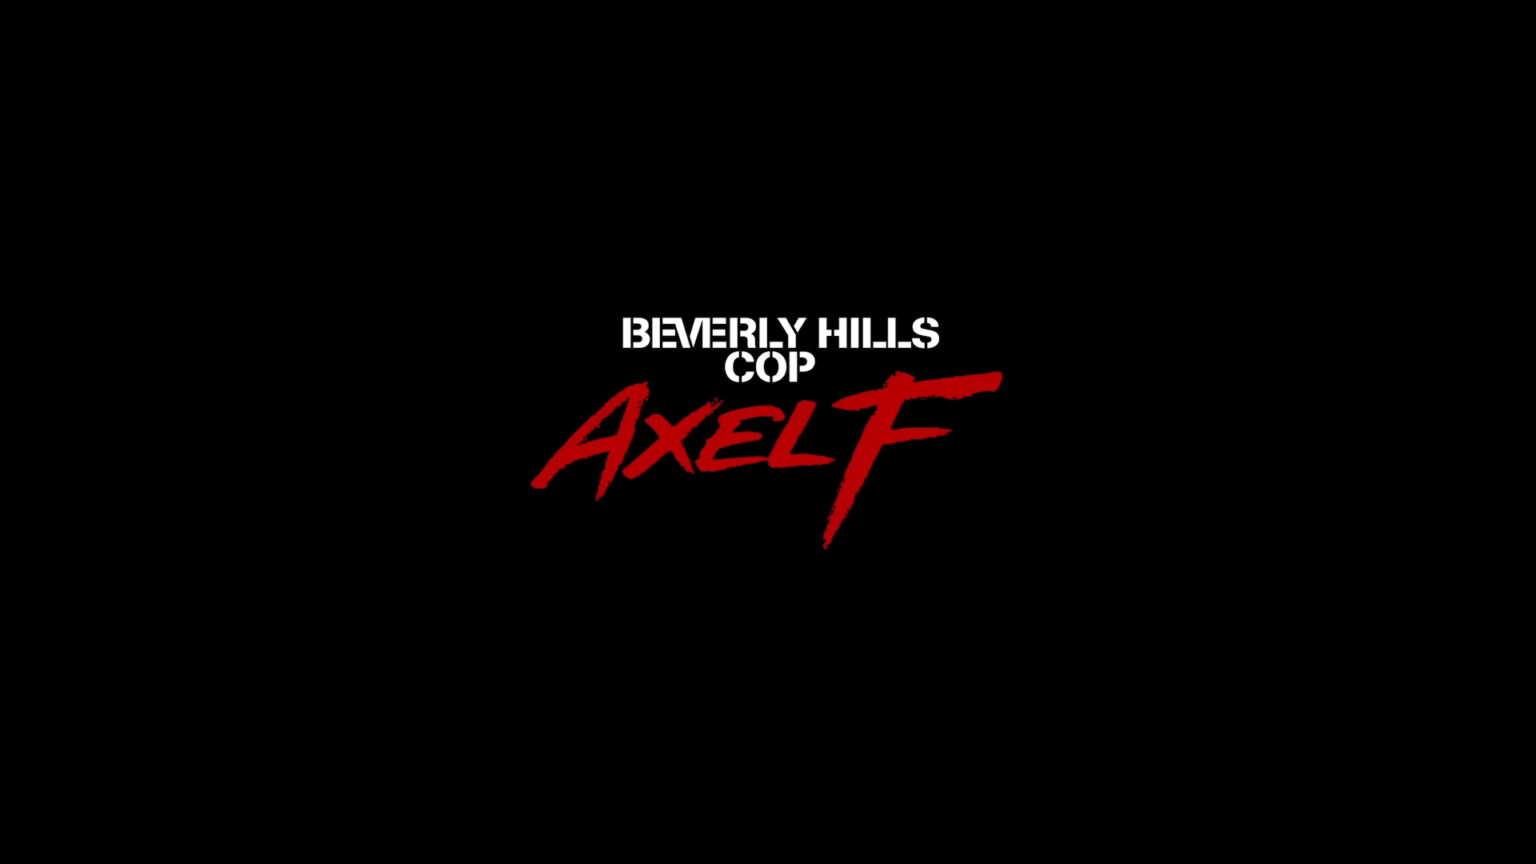 Beverly-Hills-Cop-Axel-F-Thumbnail-Image-Cherry-streamers